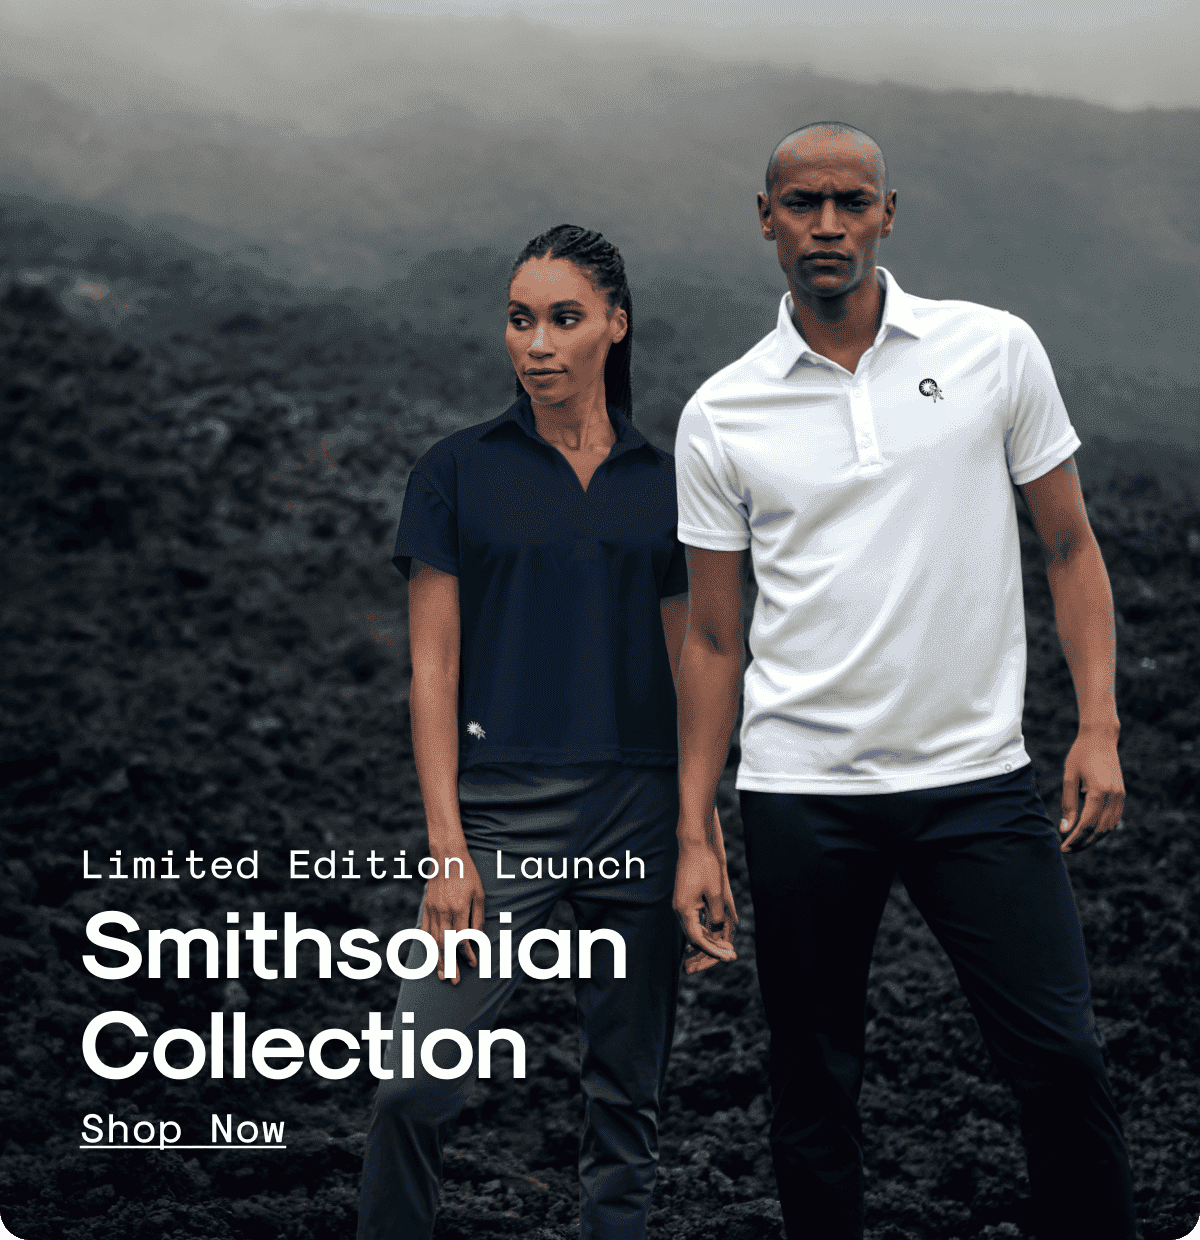 Limited Edition Launch: Smithsonian Collection